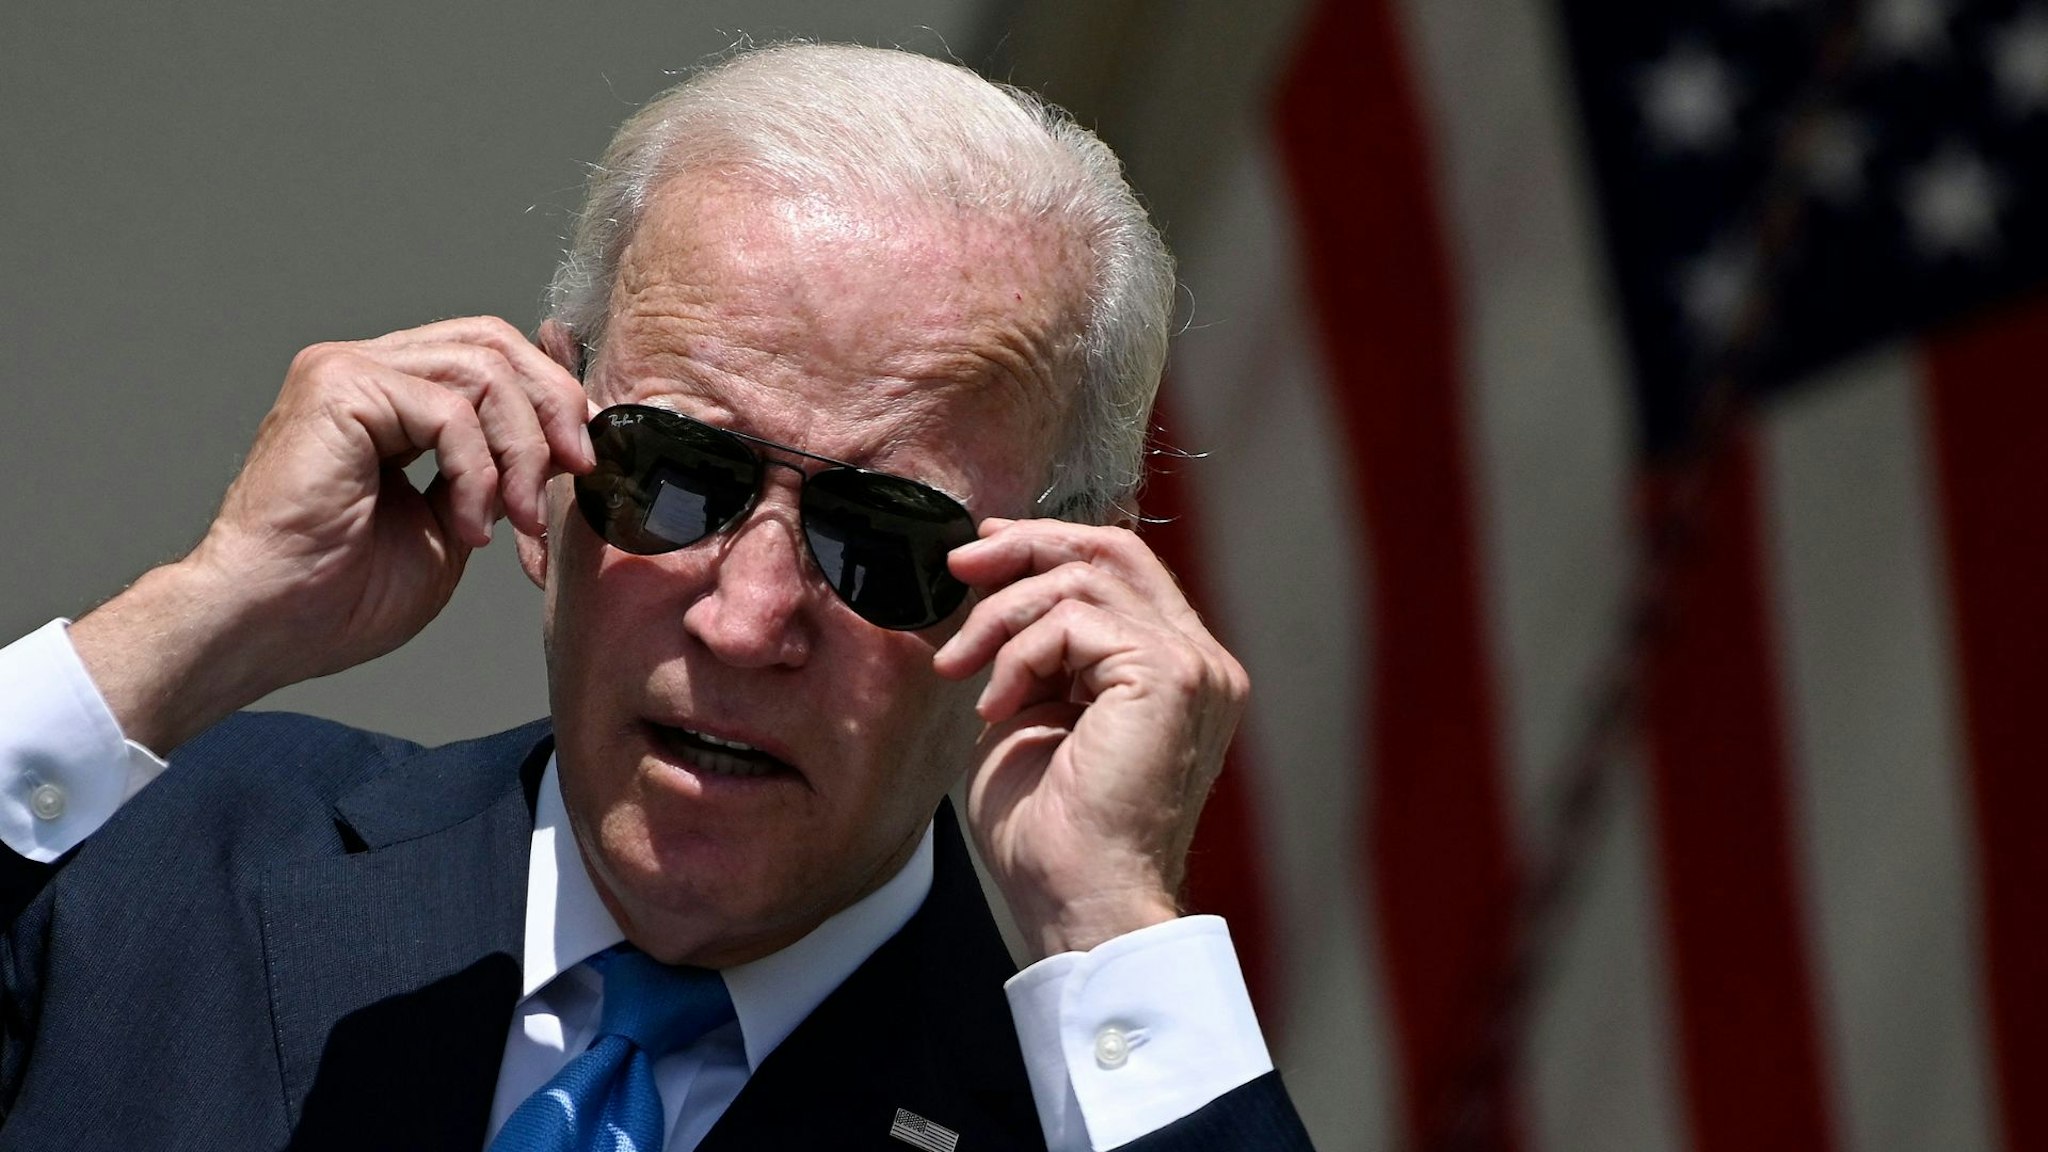 US President Joe Biden delivers remarks in the Rose Garden of the White House in Washington, DC, on July 27, 2022. - Biden has had two negative Covid-19 tests and no longer needs to isolate after recovering from infection, his White House Doctor Kevin O'Connor said Wednesday.